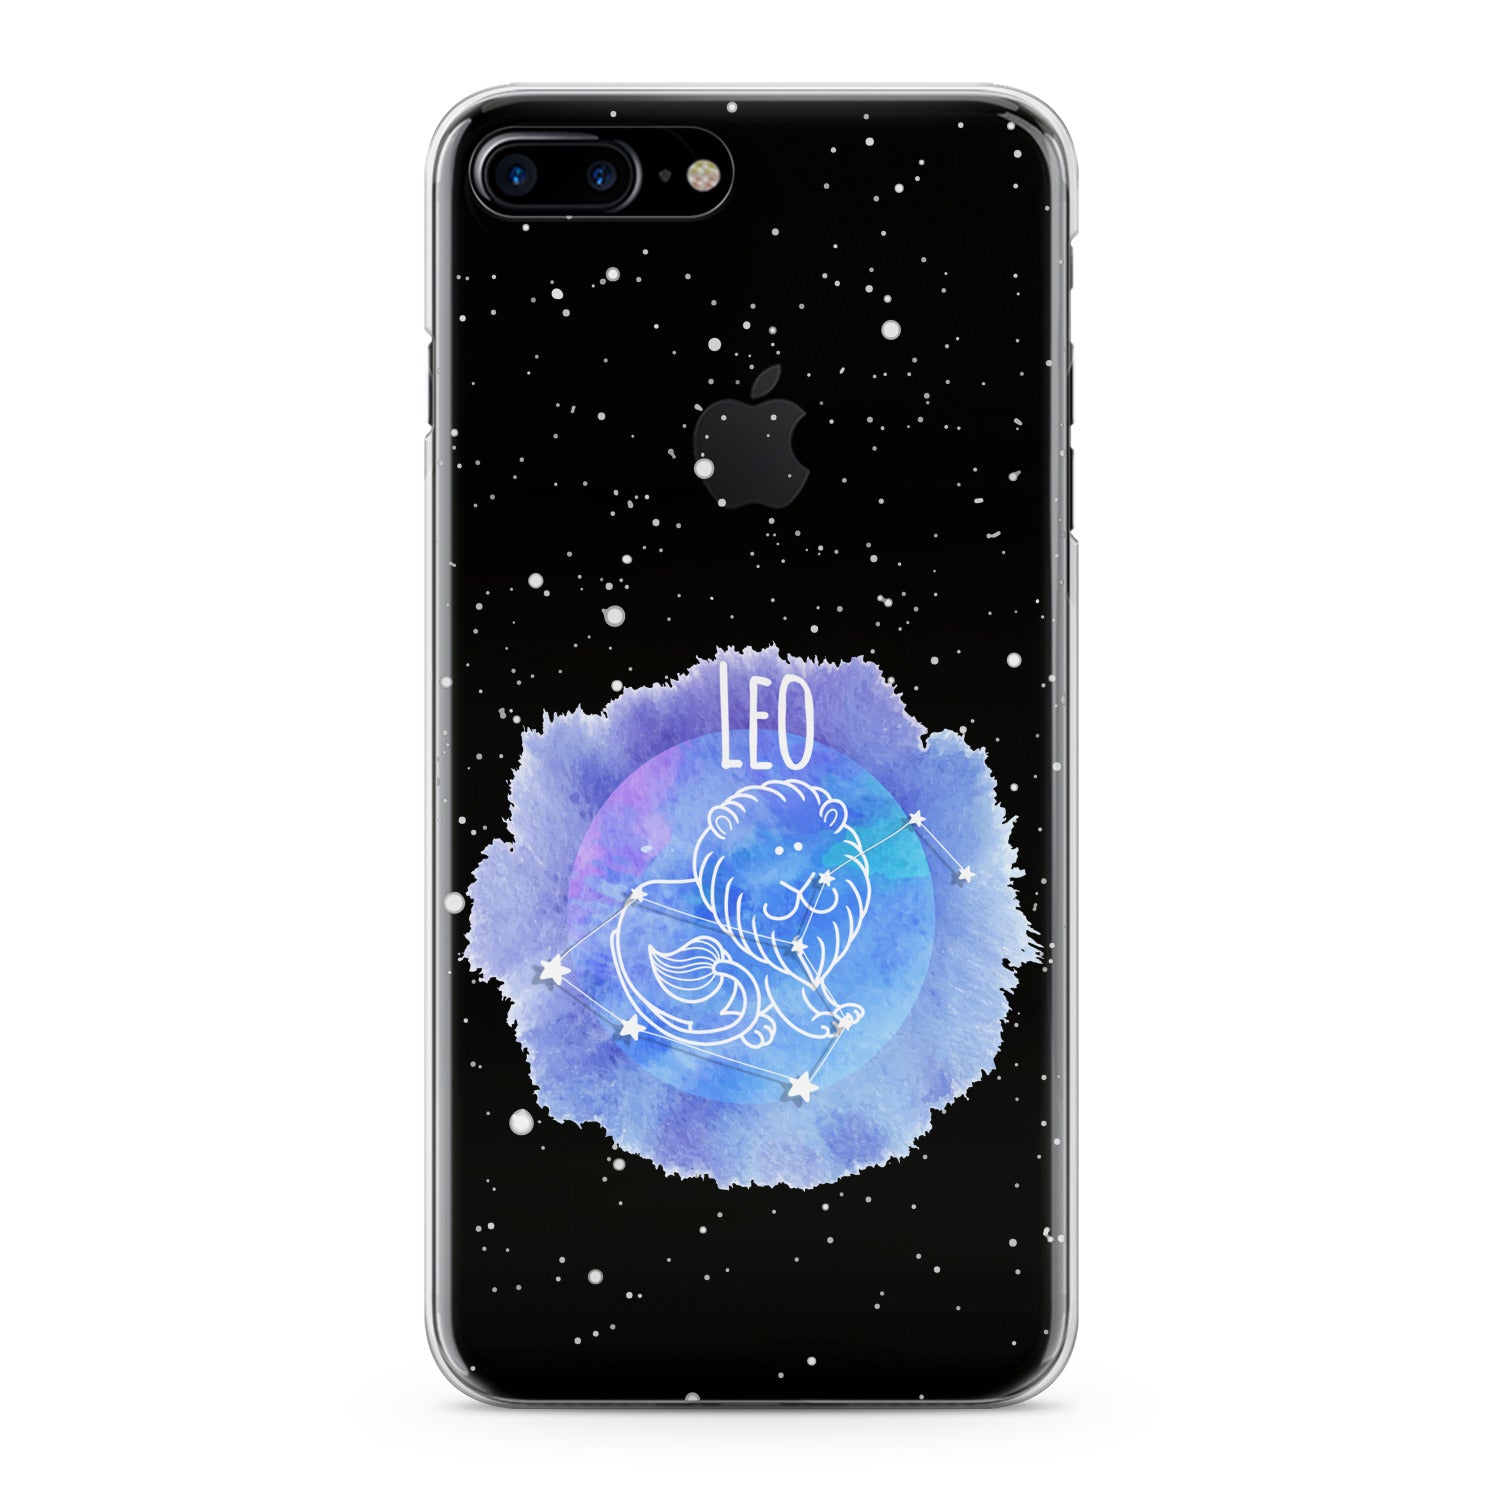 Lex Altern Leo Zodiac Phone Case for your iPhone & Android phone.